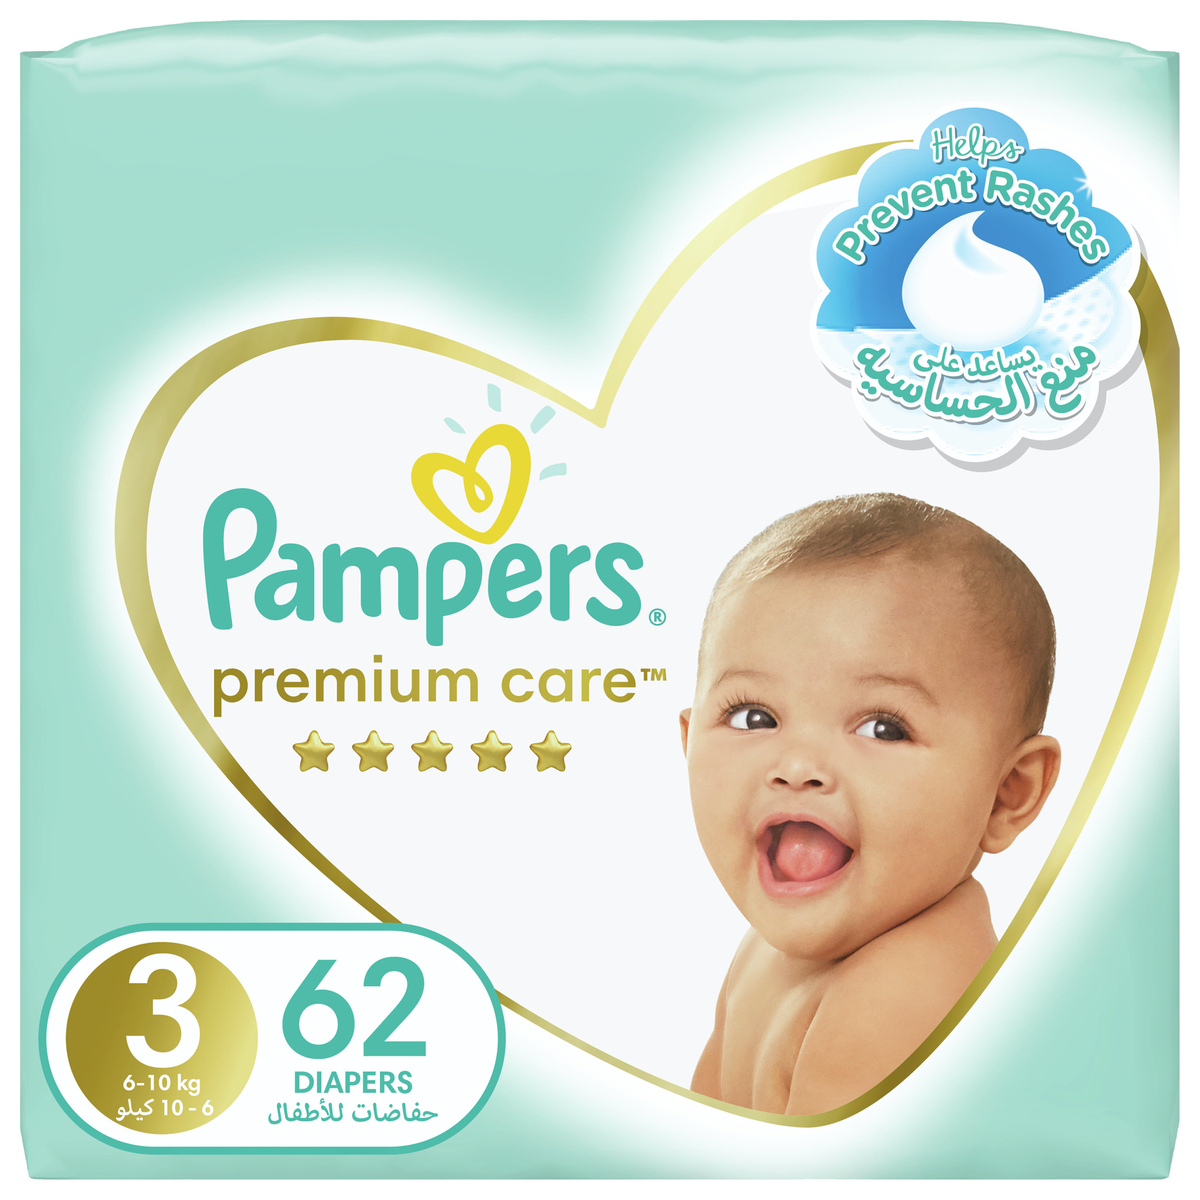 Empirisch zin Beginner Pampers Premium Care Diapers Size 3, 6-10kg The Softest Diaper 62pcs Online  at Best Price | Baby Nappies | Lulu KSA